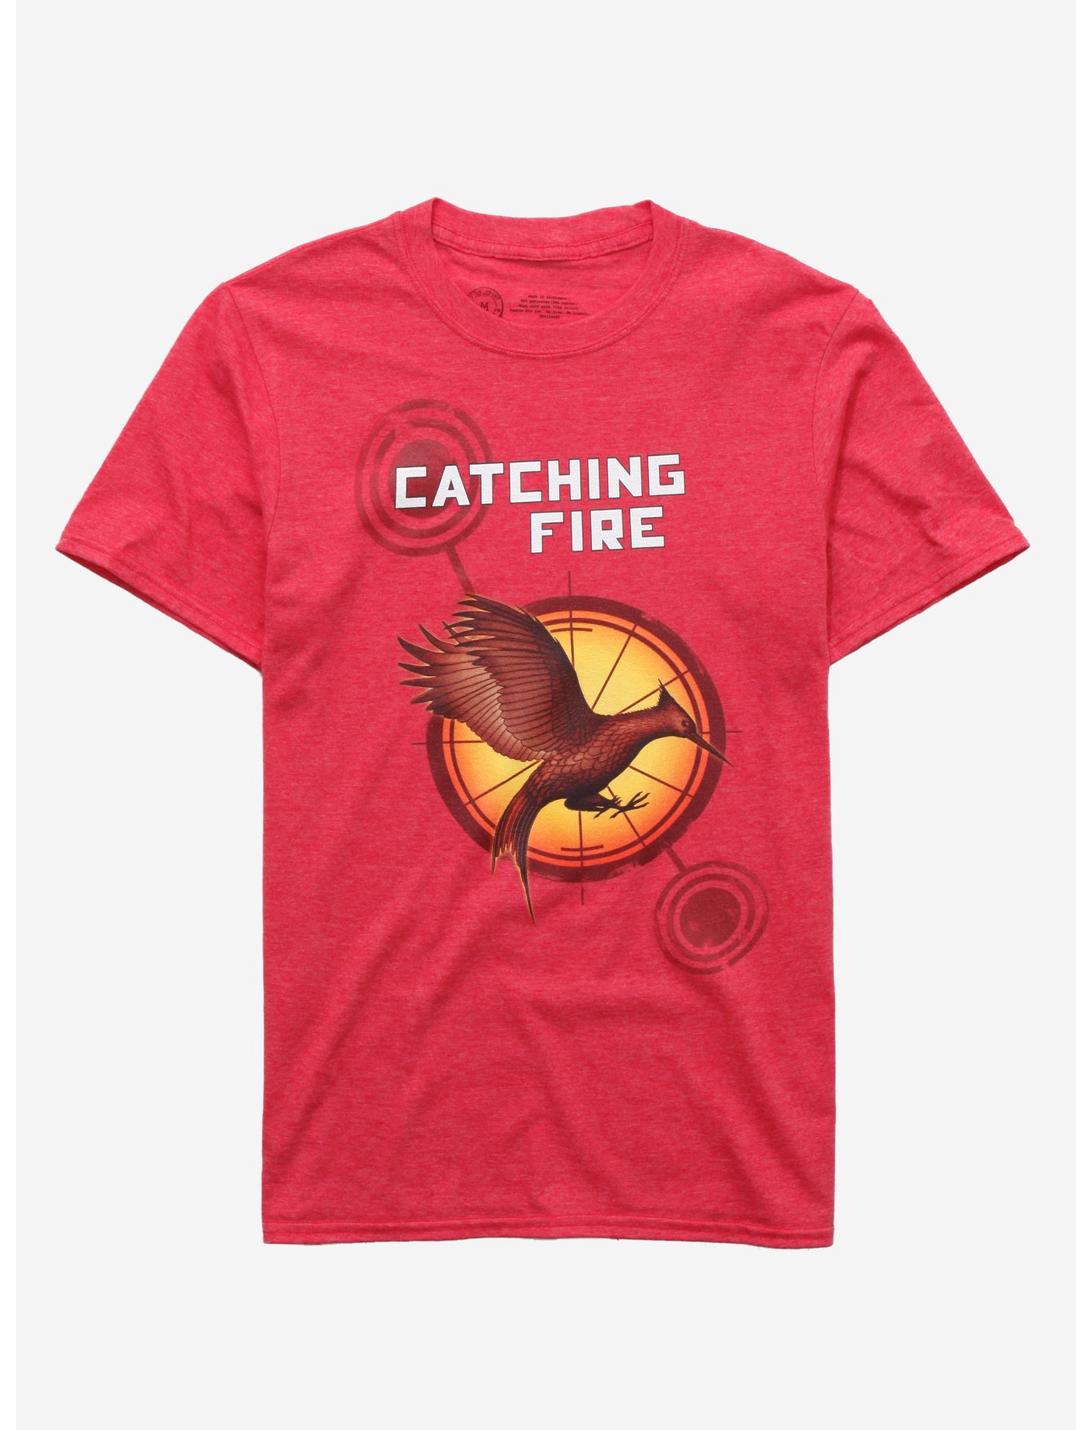 Suzanne Collins Catching Fire Book Cover T-Shirt, RED, hi-res